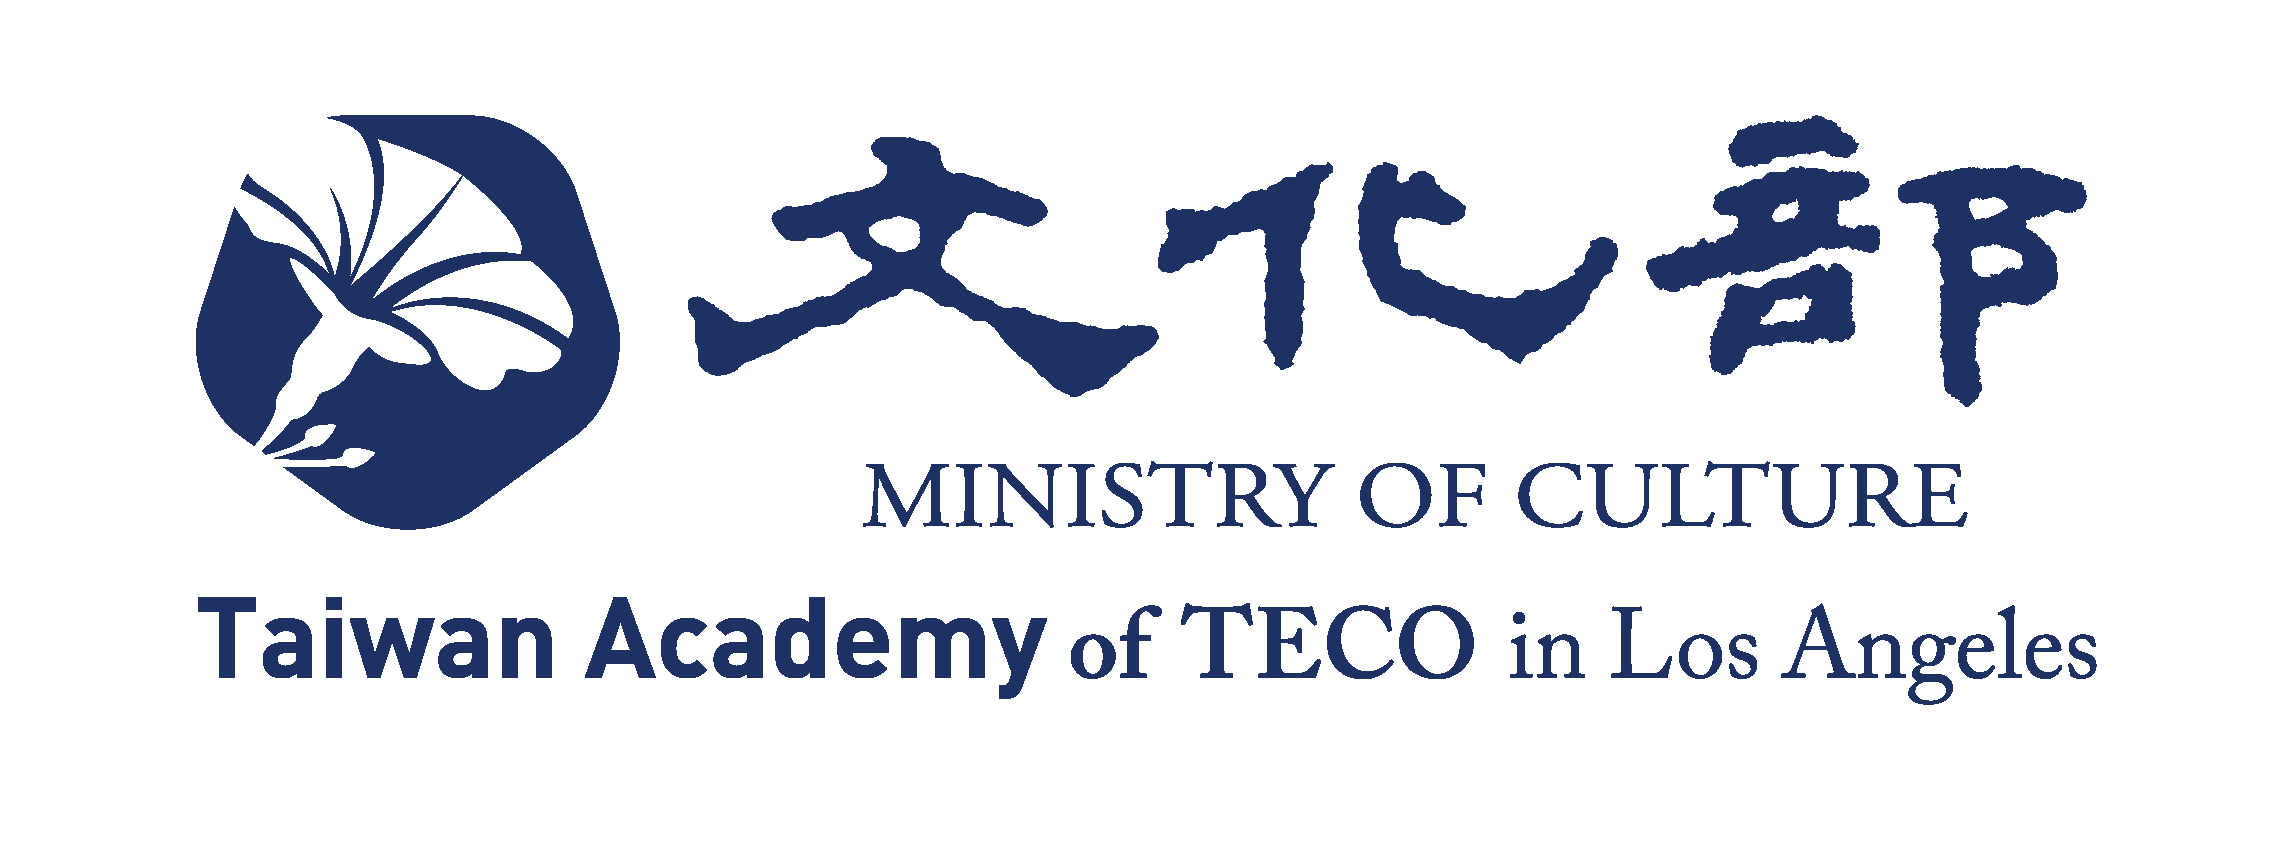 Guidelines on Cultural Grant Programs of Taiwan Academy in Los Angeles of the Ministry of Culture of Taiwan